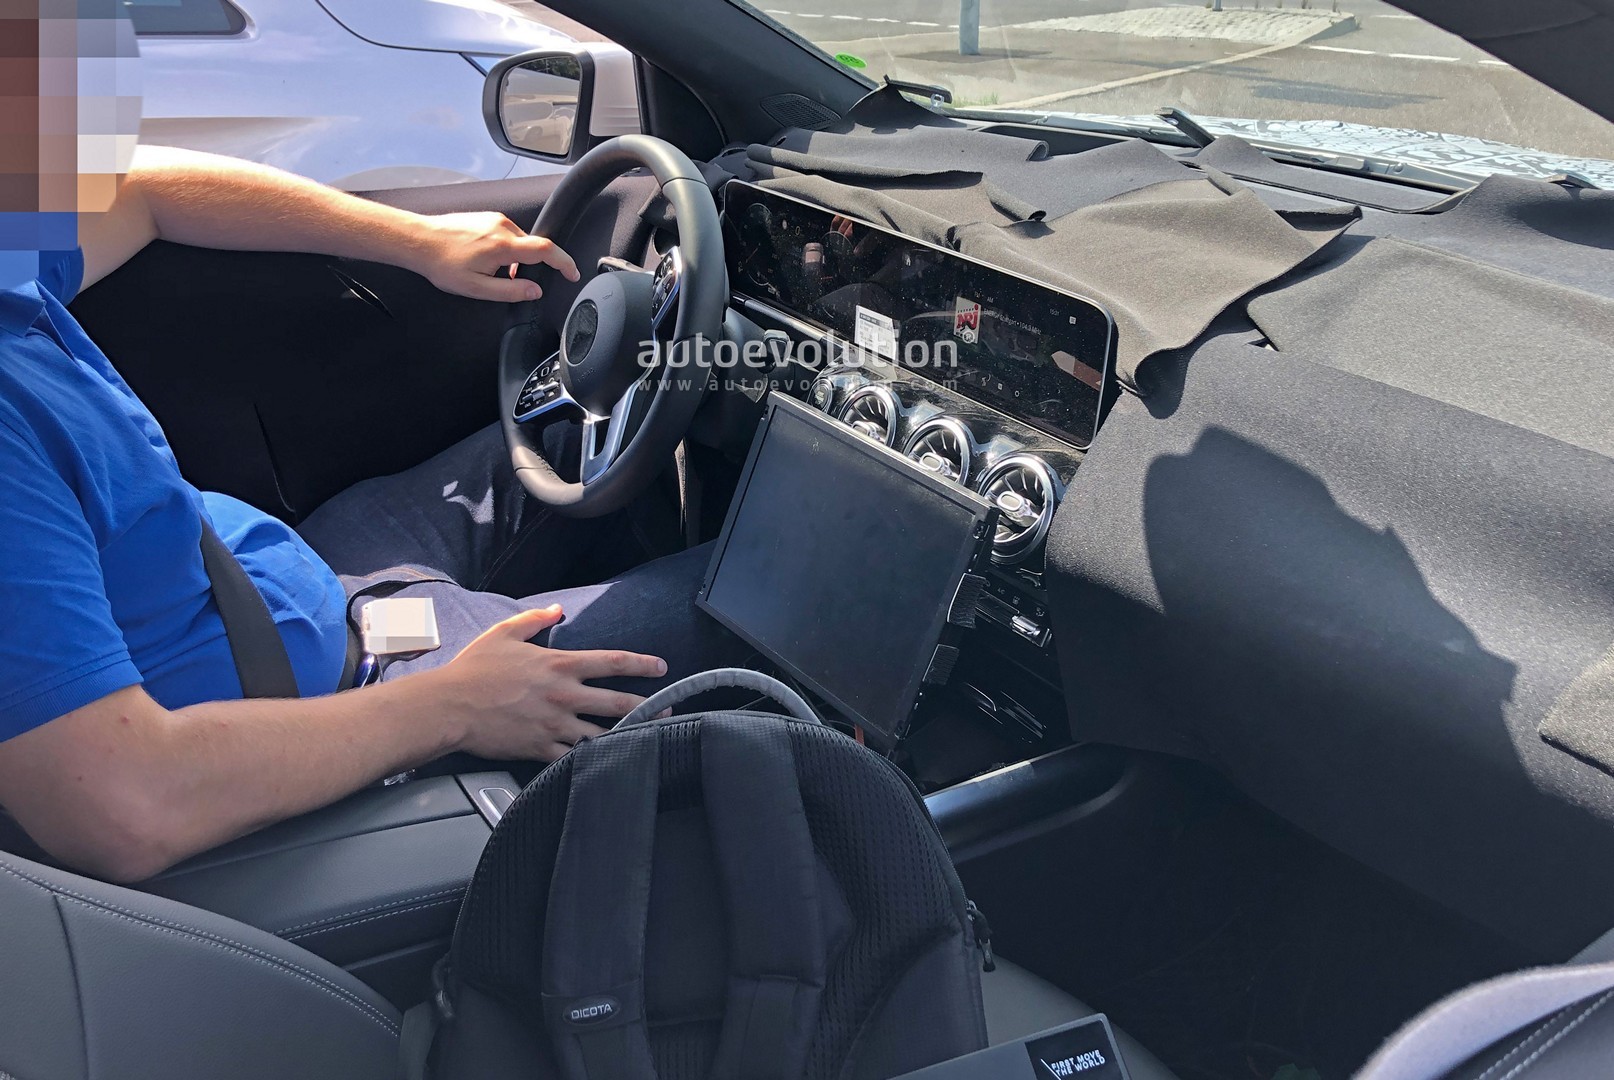 2020 - [Mercedes] GLA II - Page 3 2021-mercedes-gla-class-interior-spied-for-the-first-time-crossover-looks-cuter_10